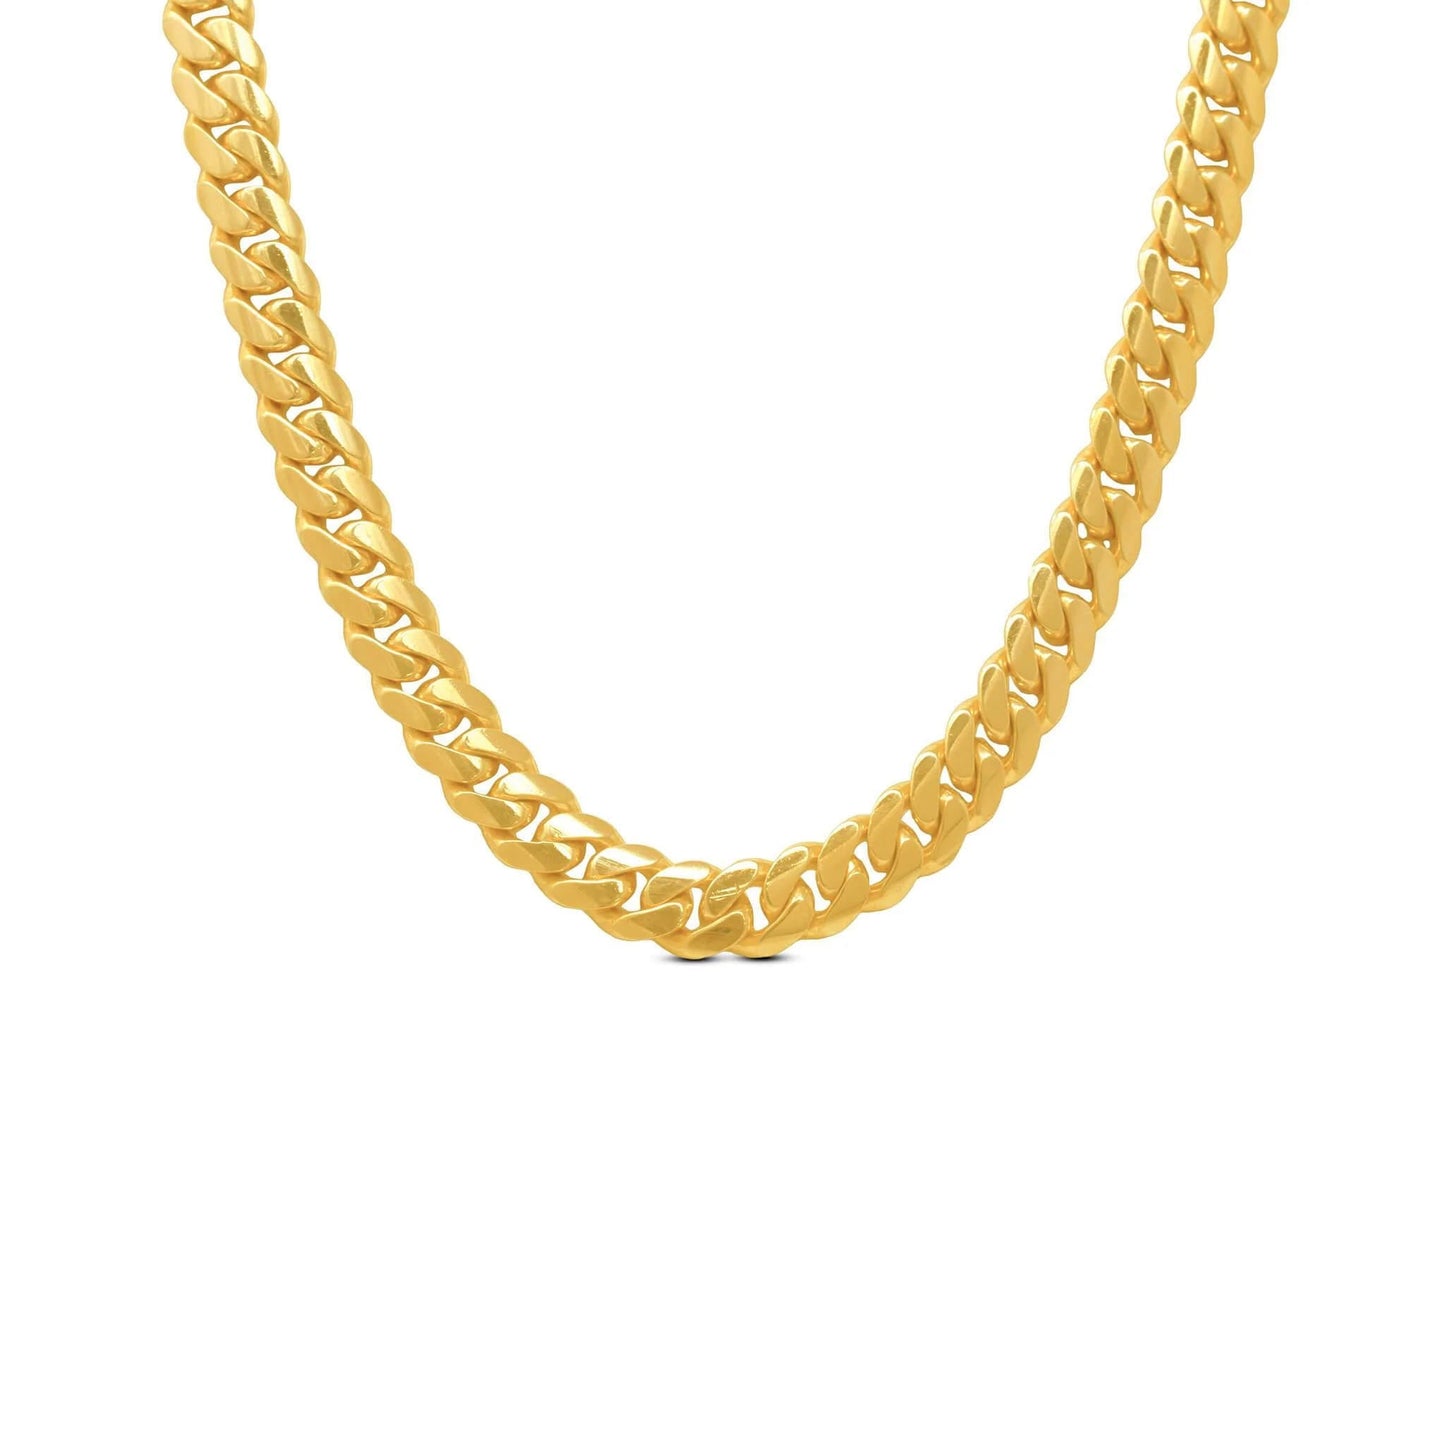 16mm Miami Cuban Link Bracelet in 14K Solid Yellow Gold - Vera Jewelry in Miami